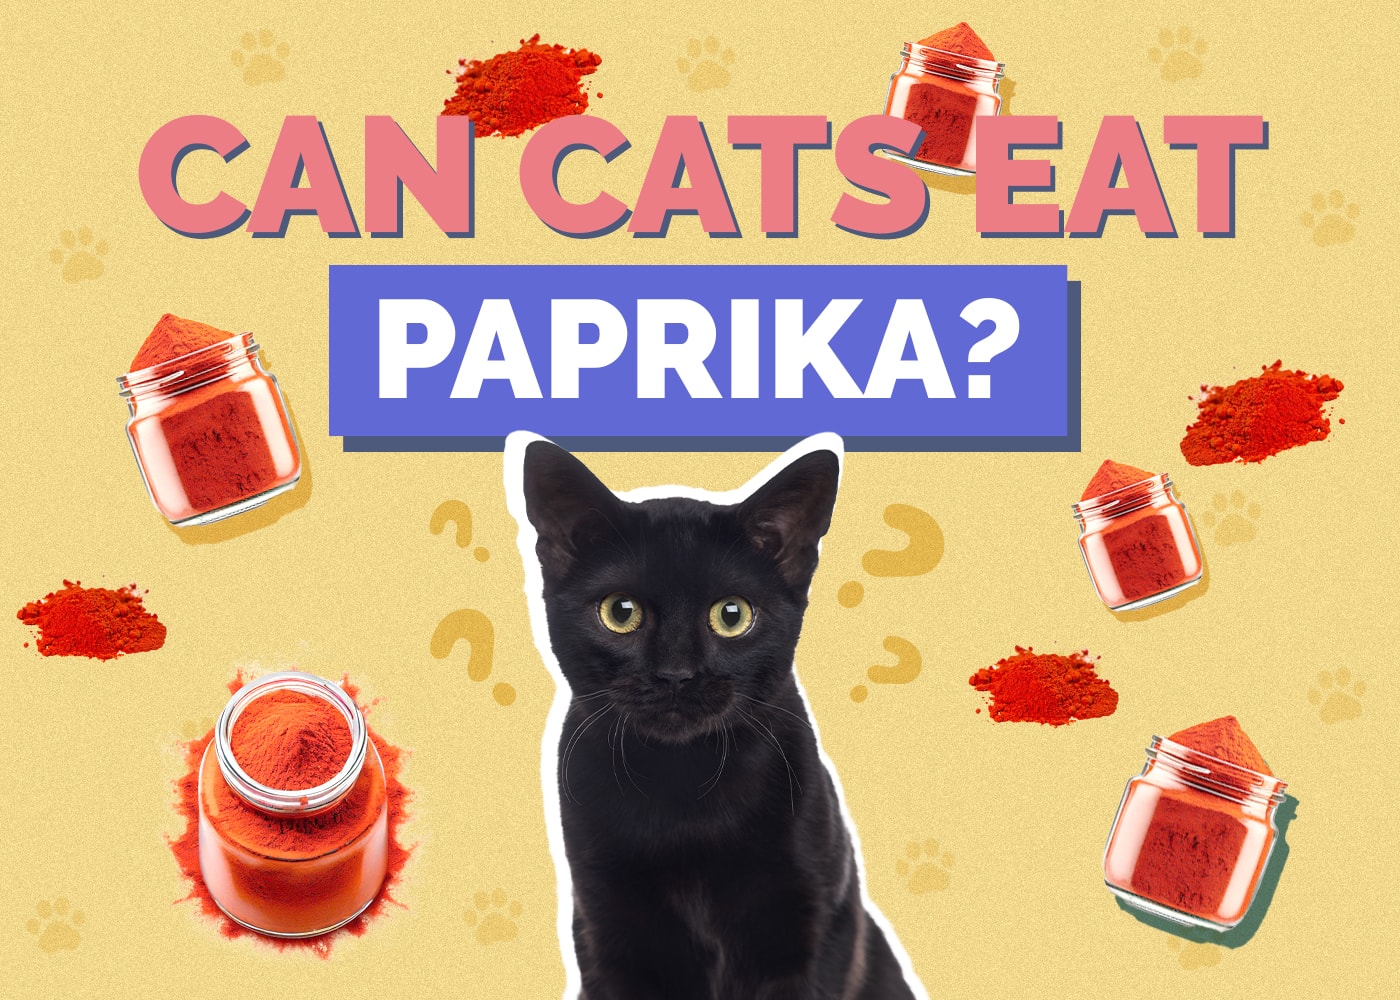 Can Cats Eat paprika